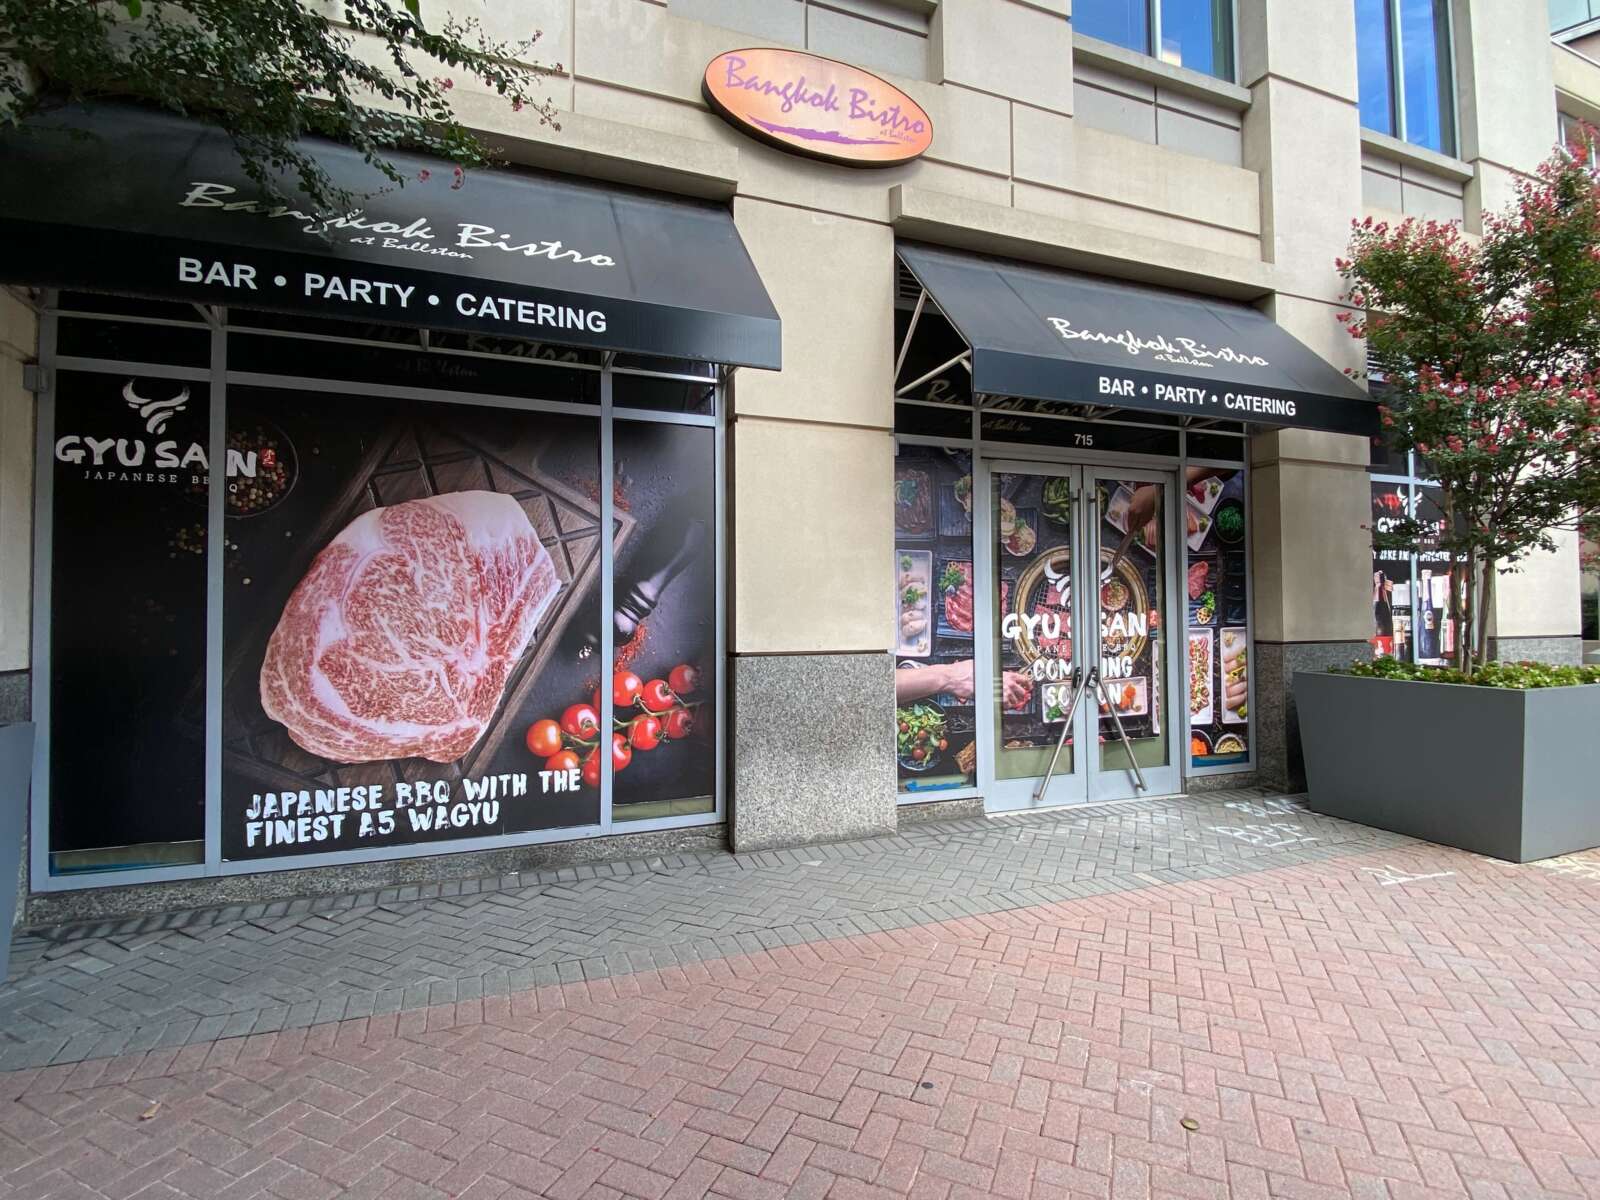 New Japanese BBQ restaurant is set to sizzle in Ballston | ARLnow.com